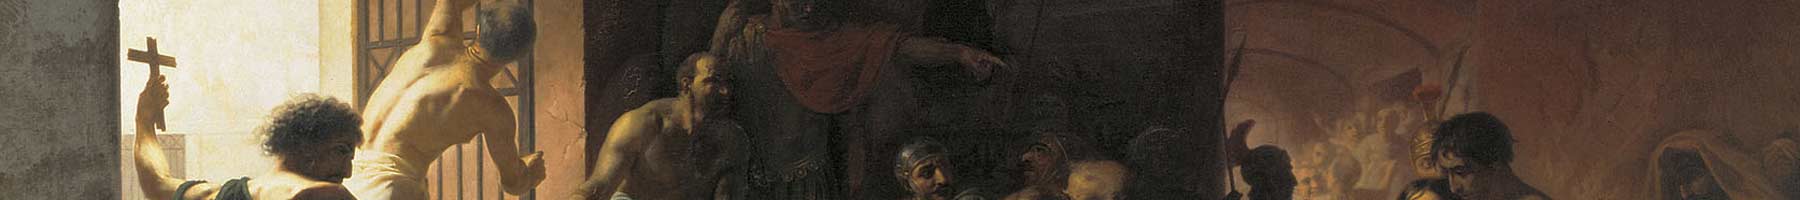 Detail from Konstantin Dmitriyevich Flavitsky's painting, Christian martyrs in the Colosseum.